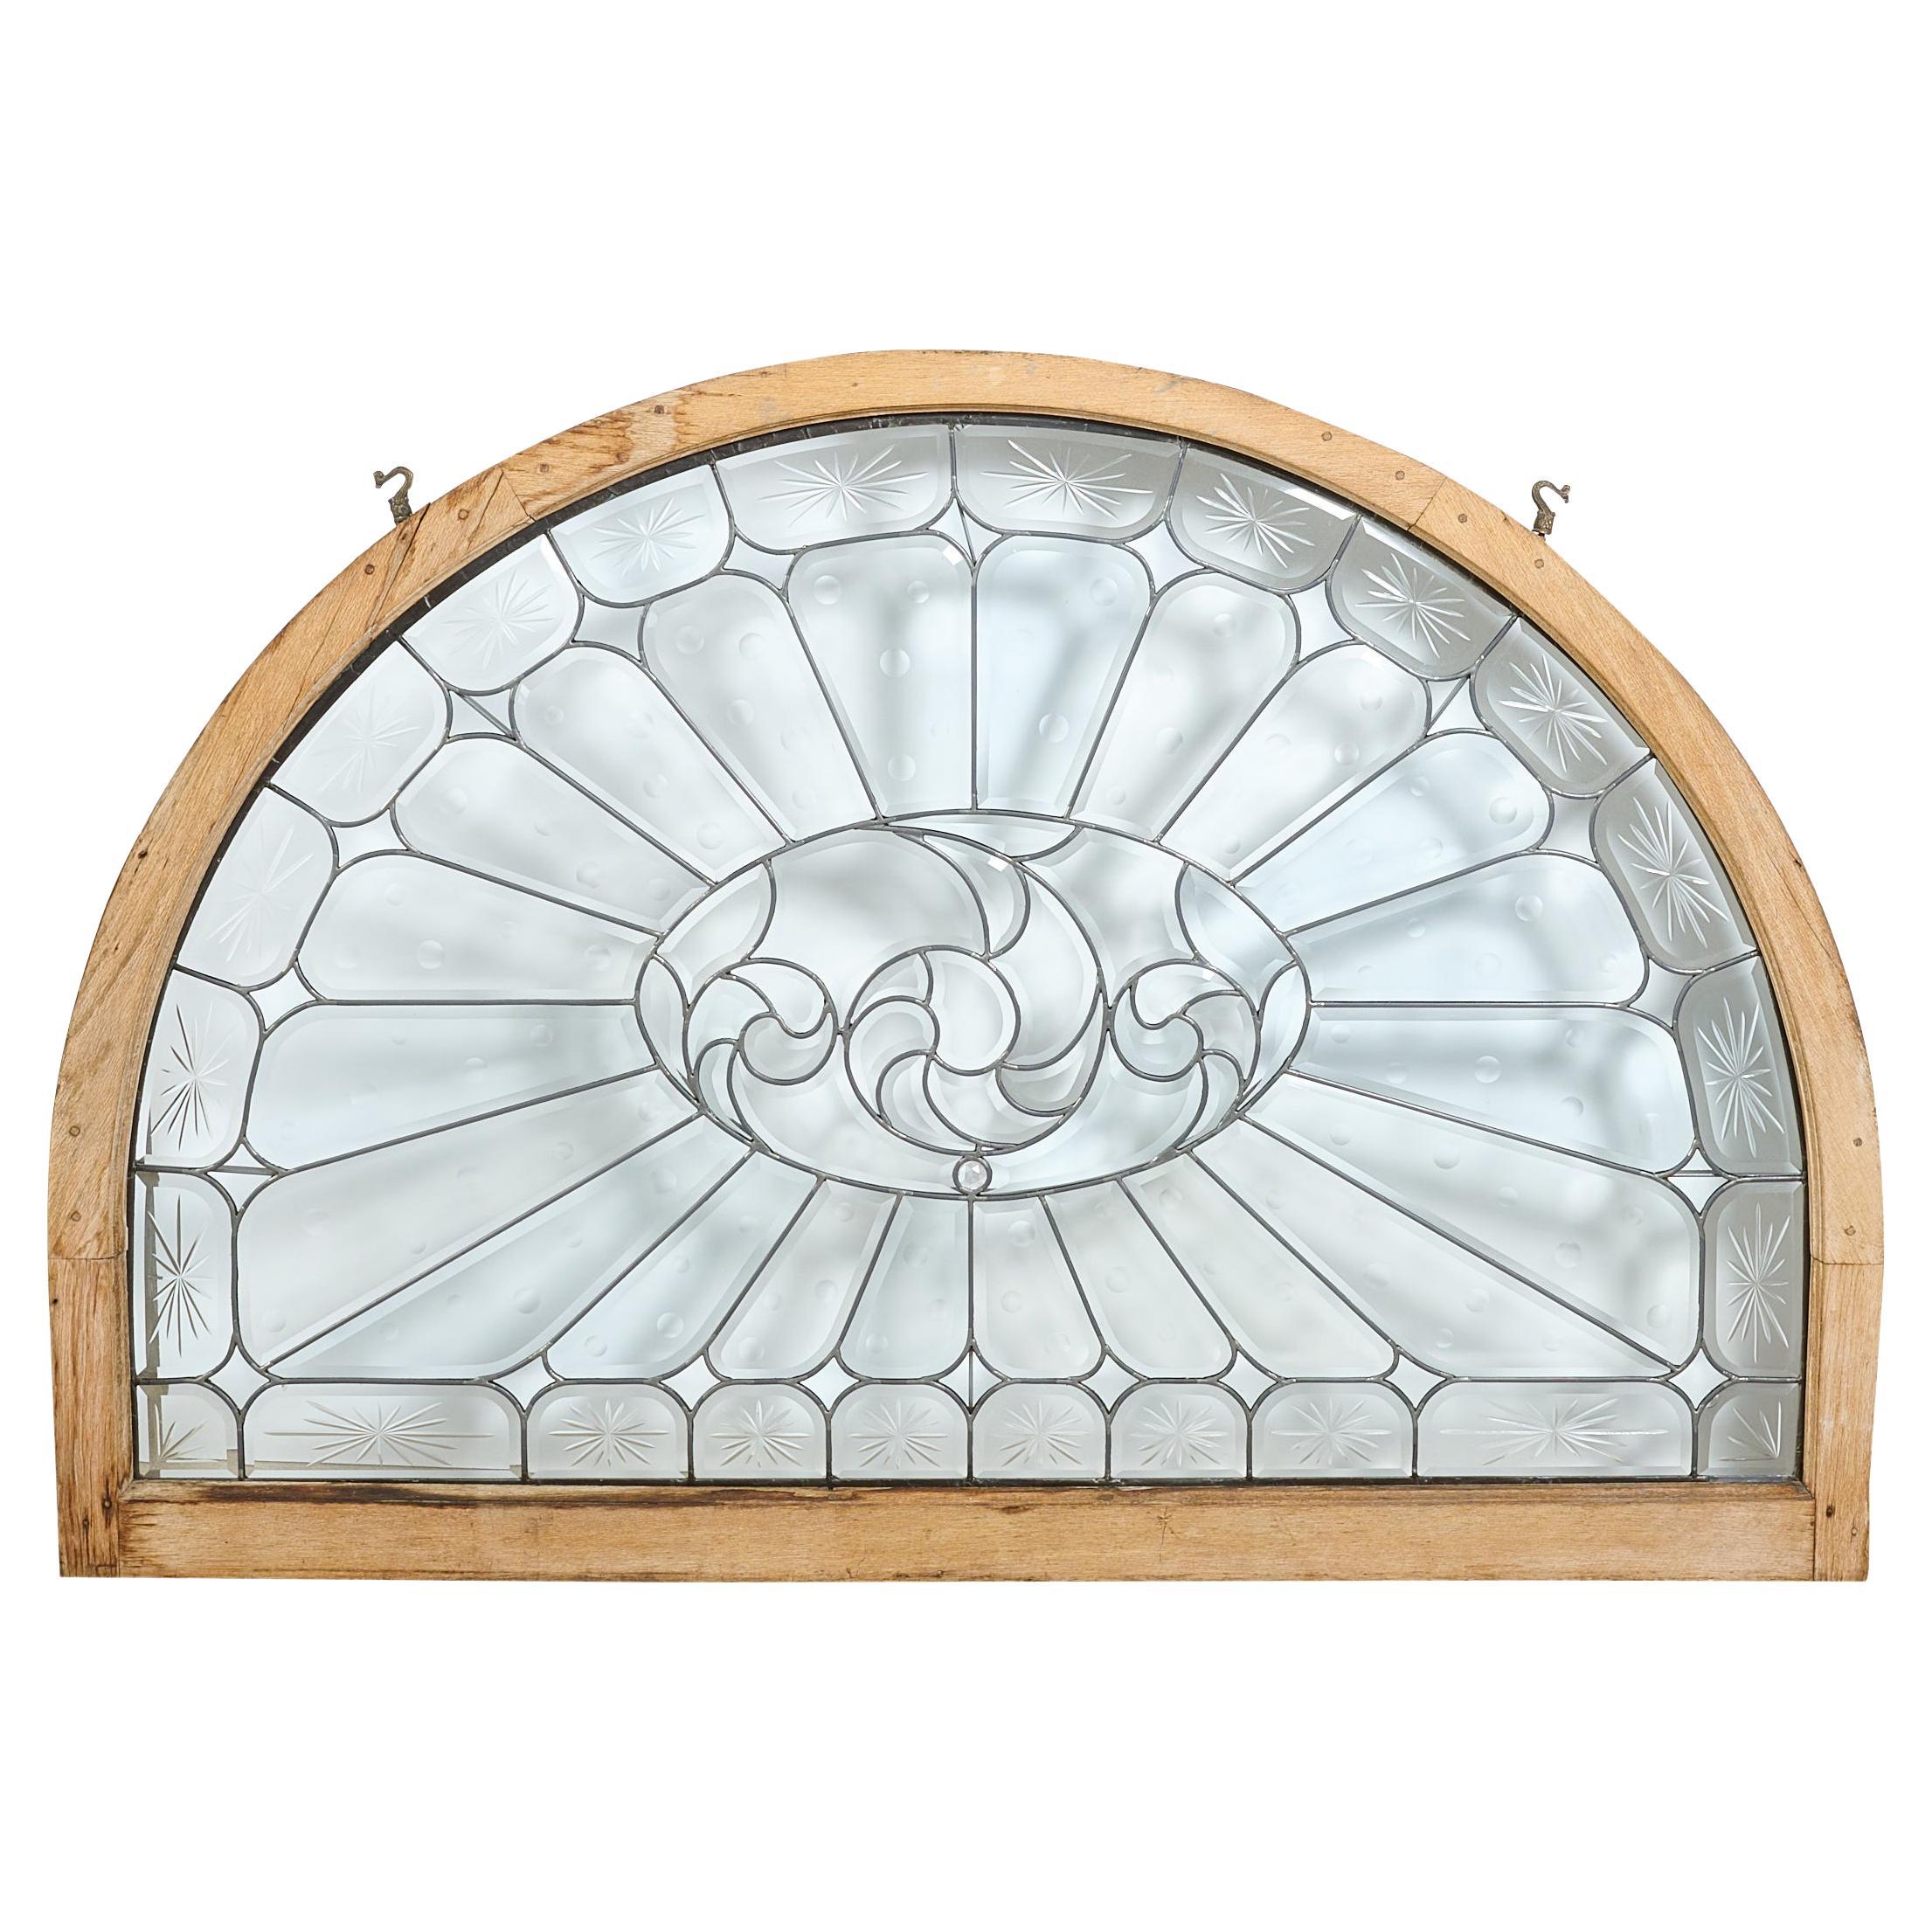 What is an arched window called?